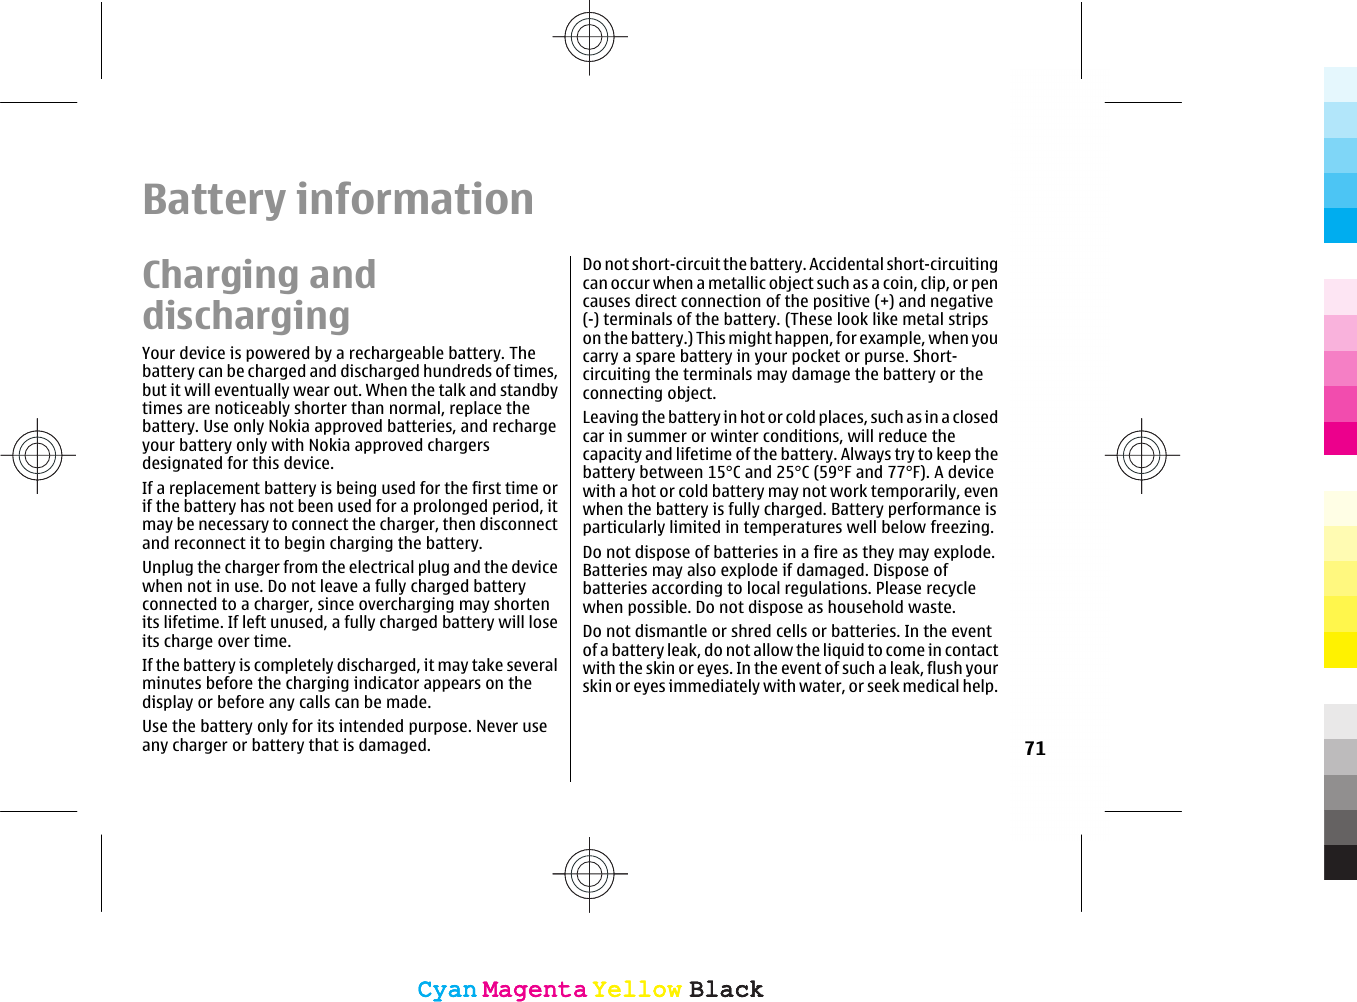 Battery informationCharging anddischargingYour device is powered by a rechargeable battery. Thebattery can be charged and discharged hundreds of times,but it will eventually wear out. When the talk and standbytimes are noticeably shorter than normal, replace thebattery. Use only Nokia approved batteries, and rechargeyour battery only with Nokia approved chargersdesignated for this device.If a replacement battery is being used for the first time orif the battery has not been used for a prolonged period, itmay be necessary to connect the charger, then disconnectand reconnect it to begin charging the battery.Unplug the charger from the electrical plug and the devicewhen not in use. Do not leave a fully charged batteryconnected to a charger, since overcharging may shortenits lifetime. If left unused, a fully charged battery will loseits charge over time.If the battery is completely discharged, it may take severalminutes before the charging indicator appears on thedisplay or before any calls can be made.Use the battery only for its intended purpose. Never useany charger or battery that is damaged.Do not short-circuit the battery. Accidental short-circuitingcan occur when a metallic object such as a coin, clip, or pencauses direct connection of the positive (+) and negative(-) terminals of the battery. (These look like metal stripson the battery.) This might happen, for example, when youcarry a spare battery in your pocket or purse. Short-circuiting the terminals may damage the battery or theconnecting object.Leaving the battery in hot or cold places, such as in a closedcar in summer or winter conditions, will reduce thecapacity and lifetime of the battery. Always try to keep thebattery between 15°C and 25°C (59°F and 77°F). A devicewith a hot or cold battery may not work temporarily, evenwhen the battery is fully charged. Battery performance isparticularly limited in temperatures well below freezing.Do not dispose of batteries in a fire as they may explode.Batteries may also explode if damaged. Dispose ofbatteries according to local regulations. Please recyclewhen possible. Do not dispose as household waste.Do not dismantle or shred cells or batteries. In the eventof a battery leak, do not allow the liquid to come in contactwith the skin or eyes. In the event of such a leak, flush yourskin or eyes immediately with water, or seek medical help.71CyanCyanMagentaMagentaYellowYellowBlackBlackCyanCyanMagentaMagentaYellowYellowBlackBlack